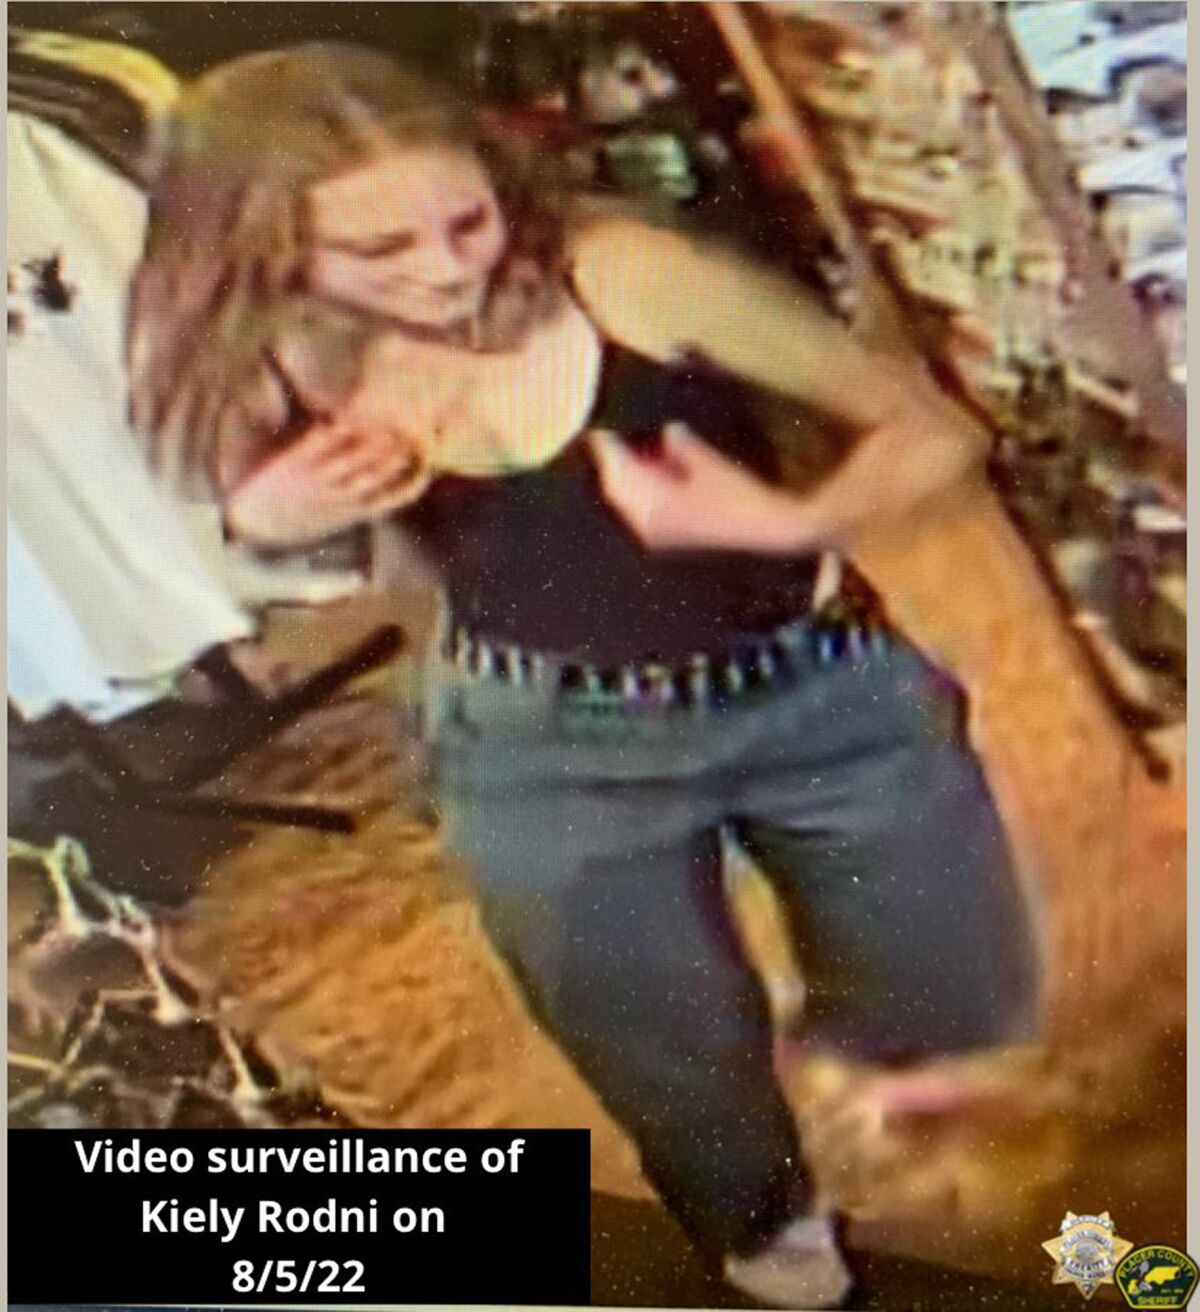 In this image from surveillance video released by the Placer County Sheriff's Office is Kiely Rodni at a local business in Truckee, Calif., on Aug. 5, 2022. Authorities in Northern California released a frame from surveillance video showing the missing 16-year-old at a store before she disappeared over the weekend and asked, Wednesday, Aug. 10, 2022, for anyone with information to contact officials, saying they are not getting new leads. (Placer County Sheriff's Office via AP)